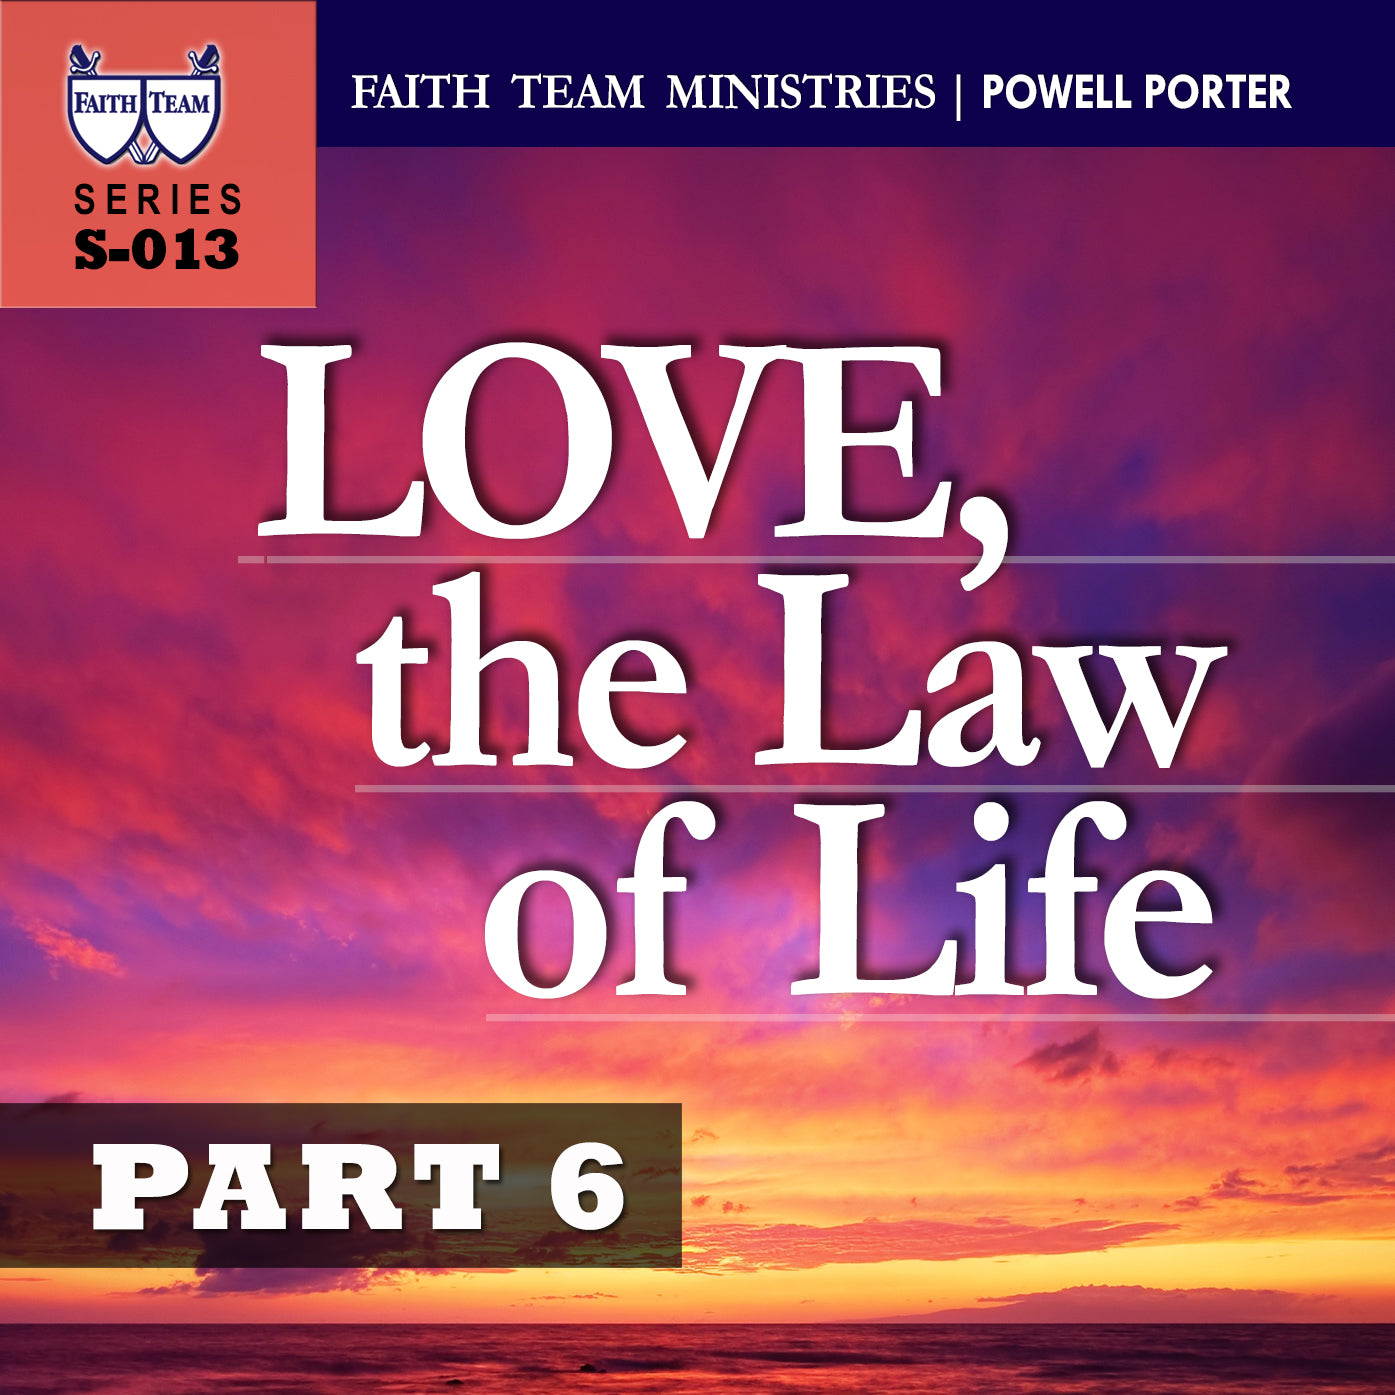 LOVE - THE LAW OF LIFE | Part 6: The Law Of Life